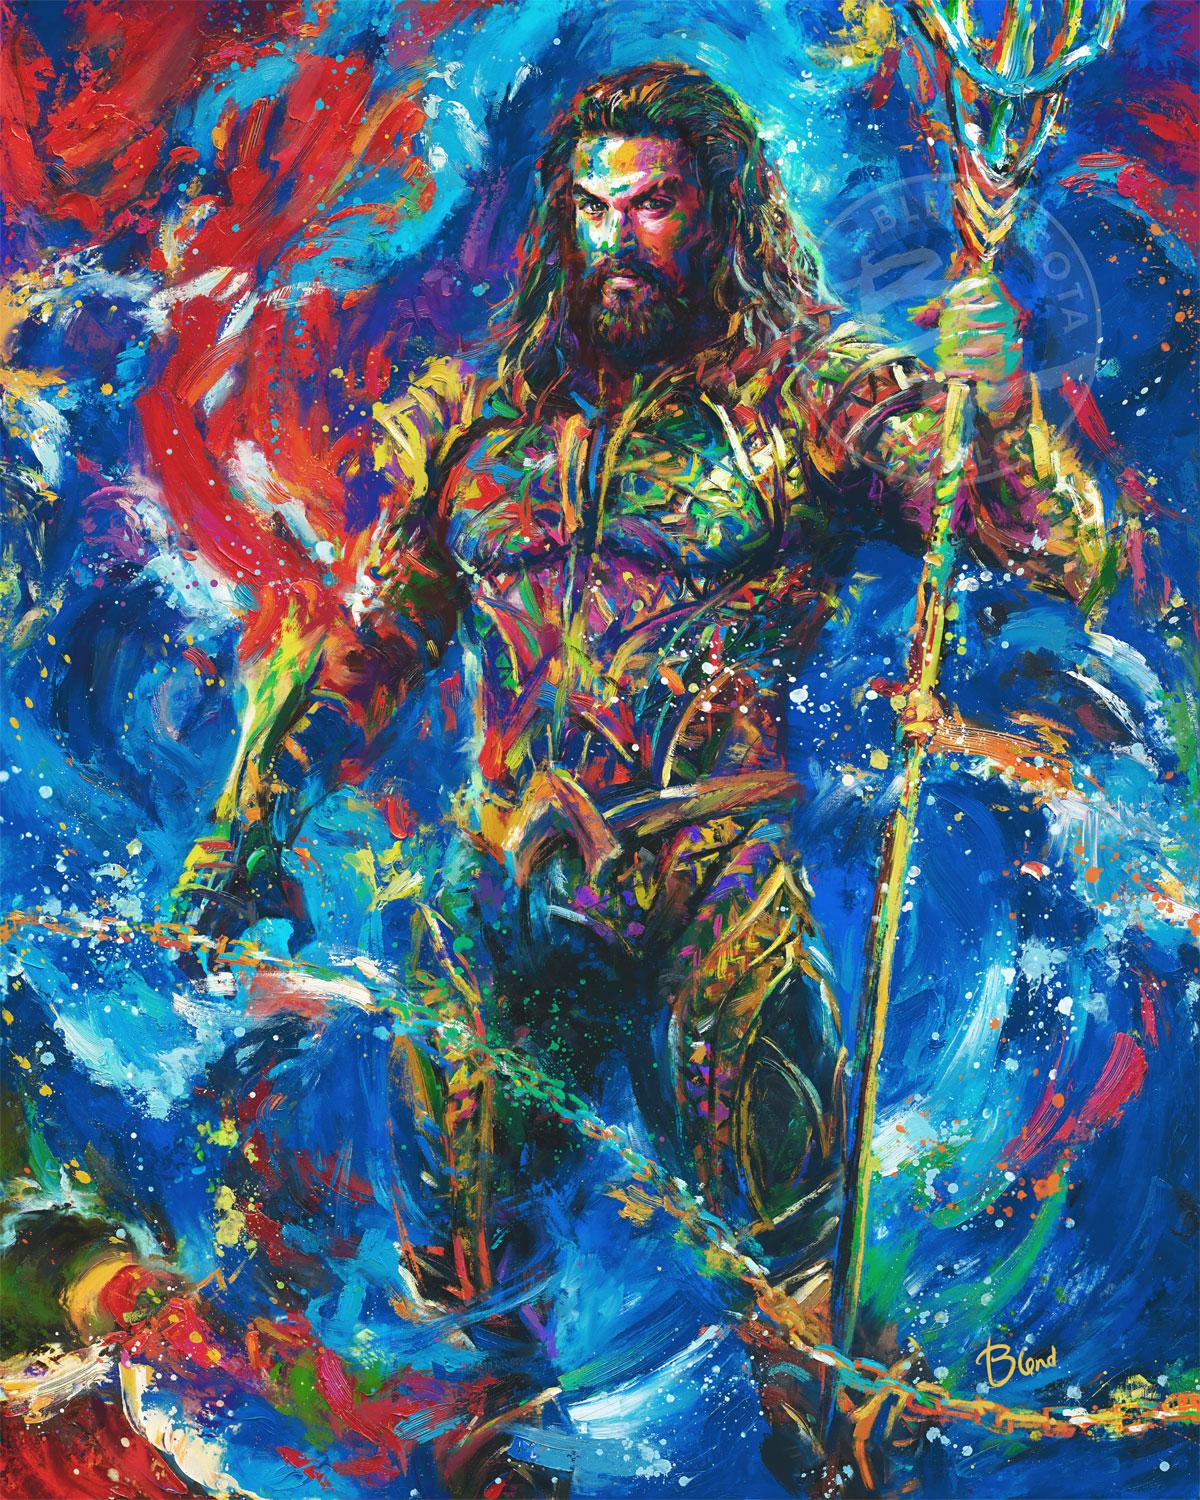 This licensed Blend Cota oil on canvas painting of Jason Momoa as the Aquaman is brought to life utilizing Blend's now famous colorism technique. This painting captures what Jason Momoa brings to the screen when watching his Aquaman movies. This